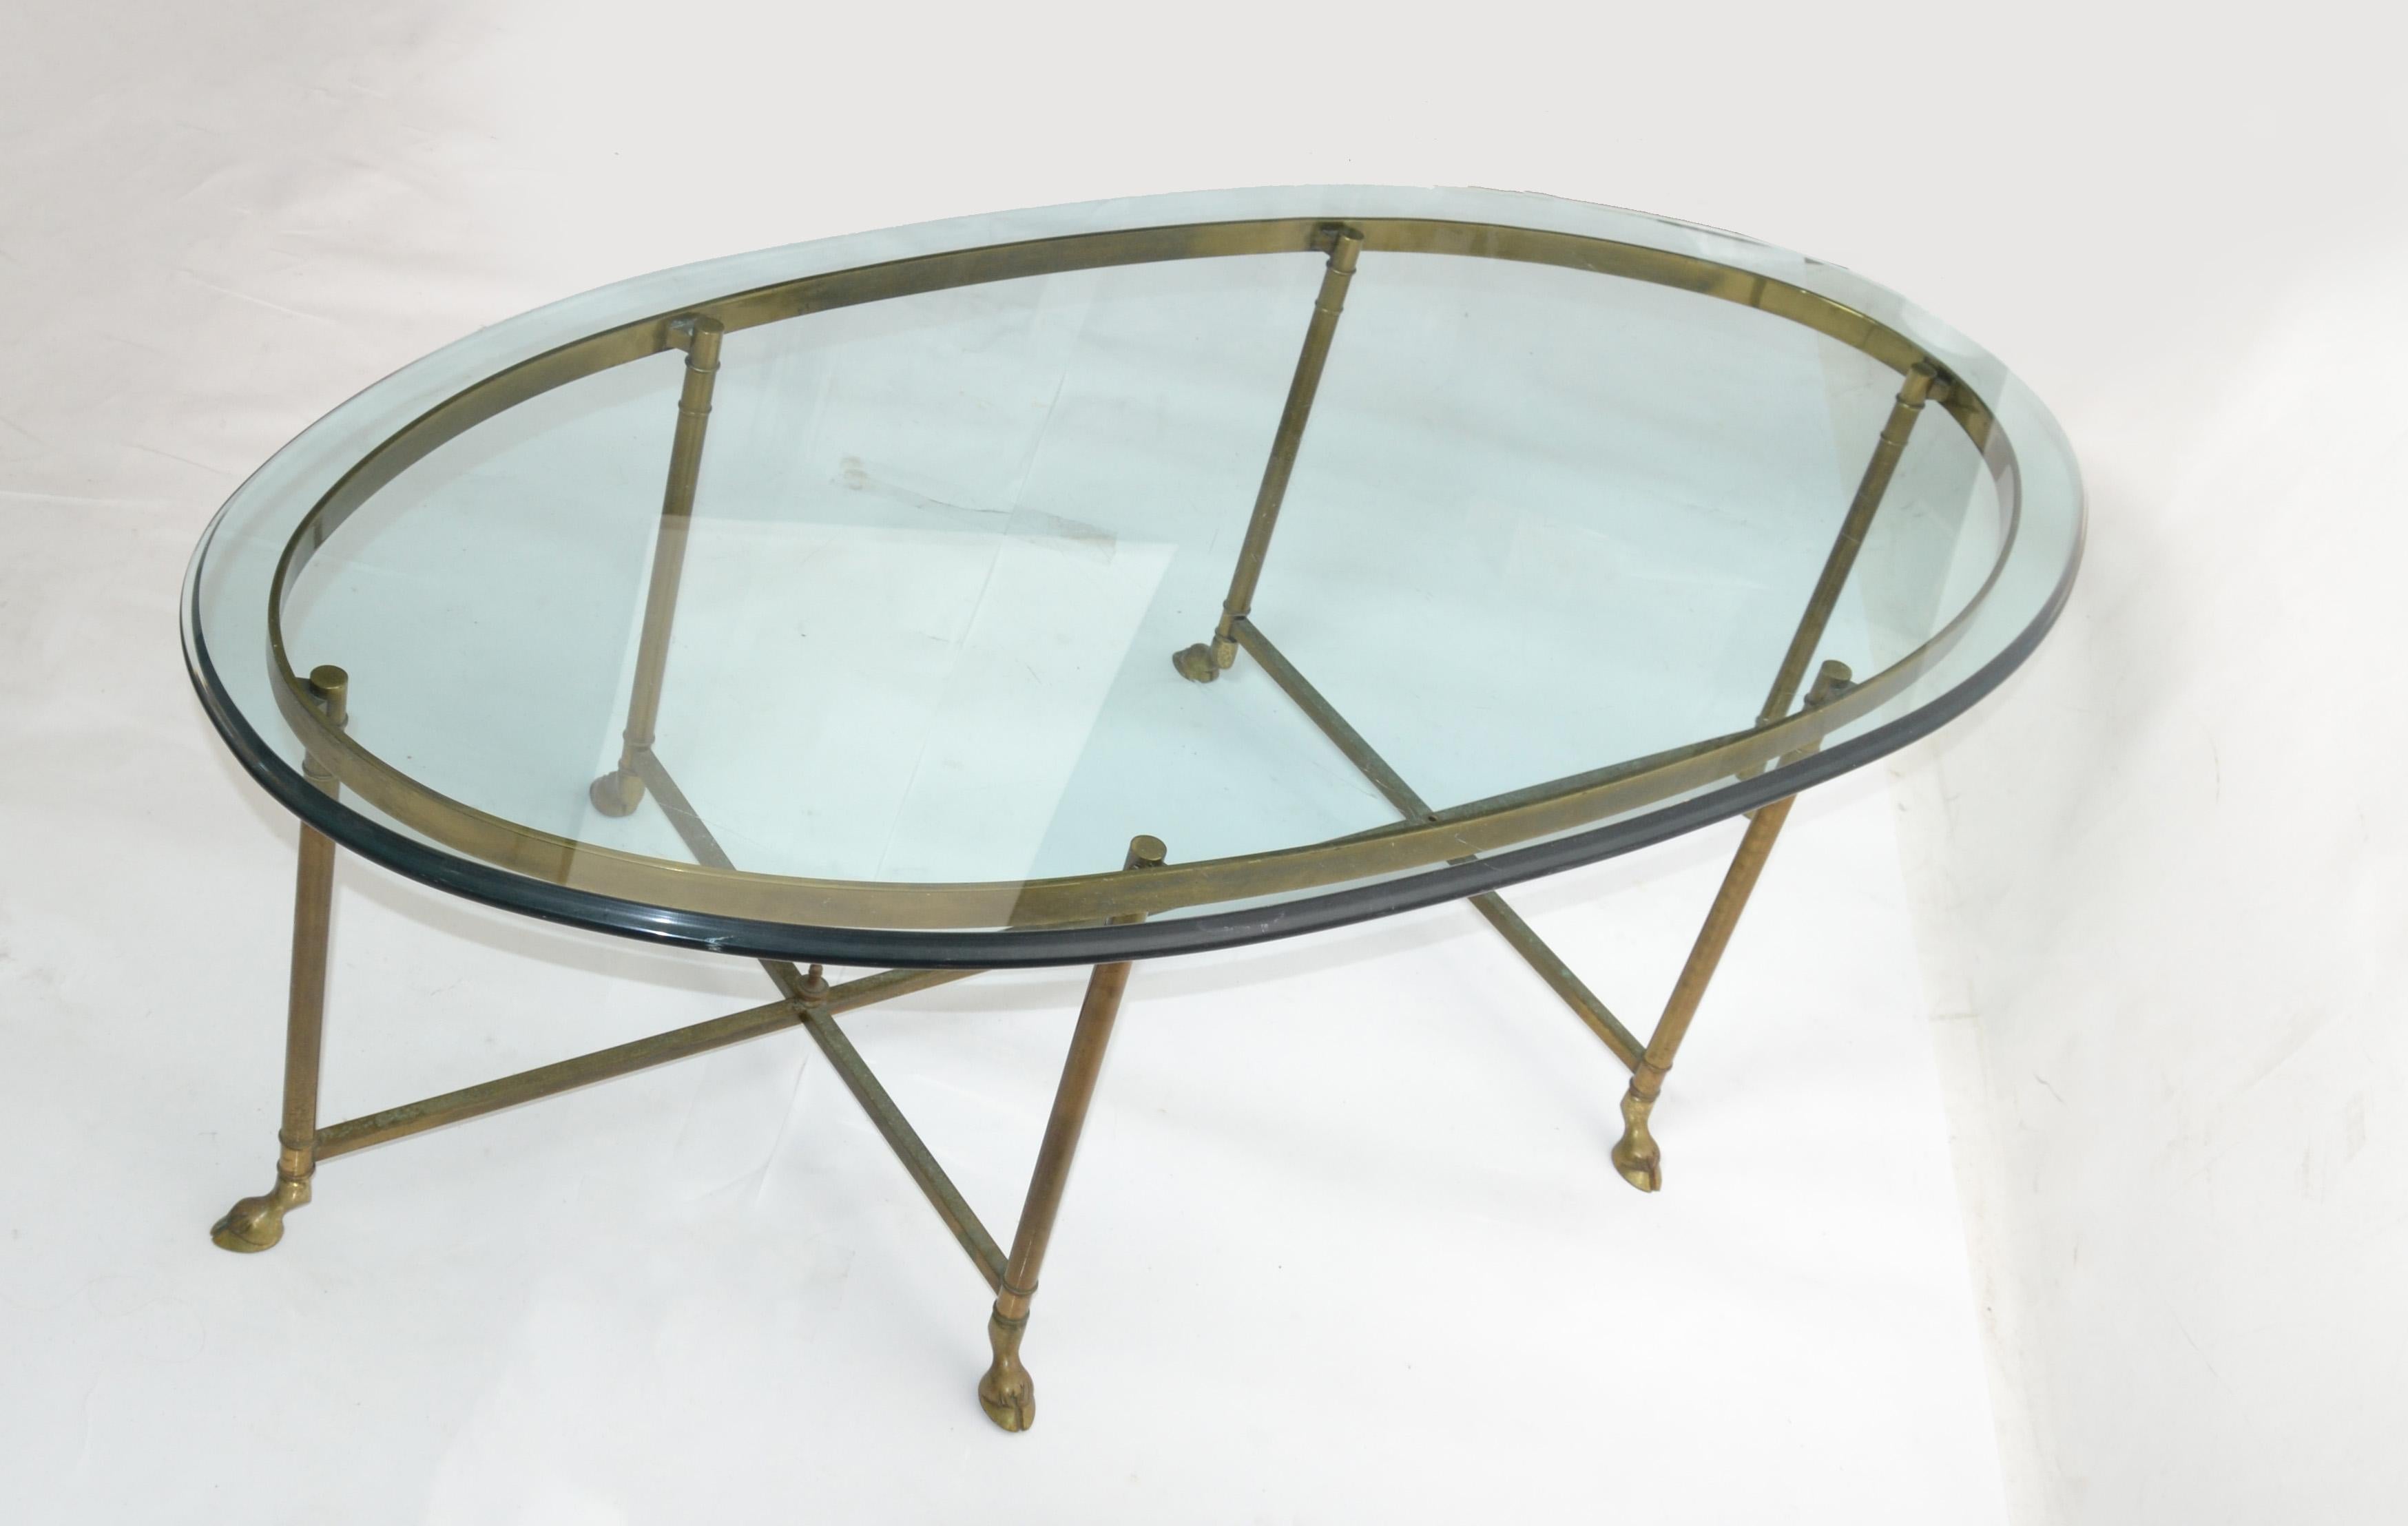 20th Century Hollywood Regency Mastercraft Brass Hoof Feet Coffee Table Racetrack Glass Top For Sale